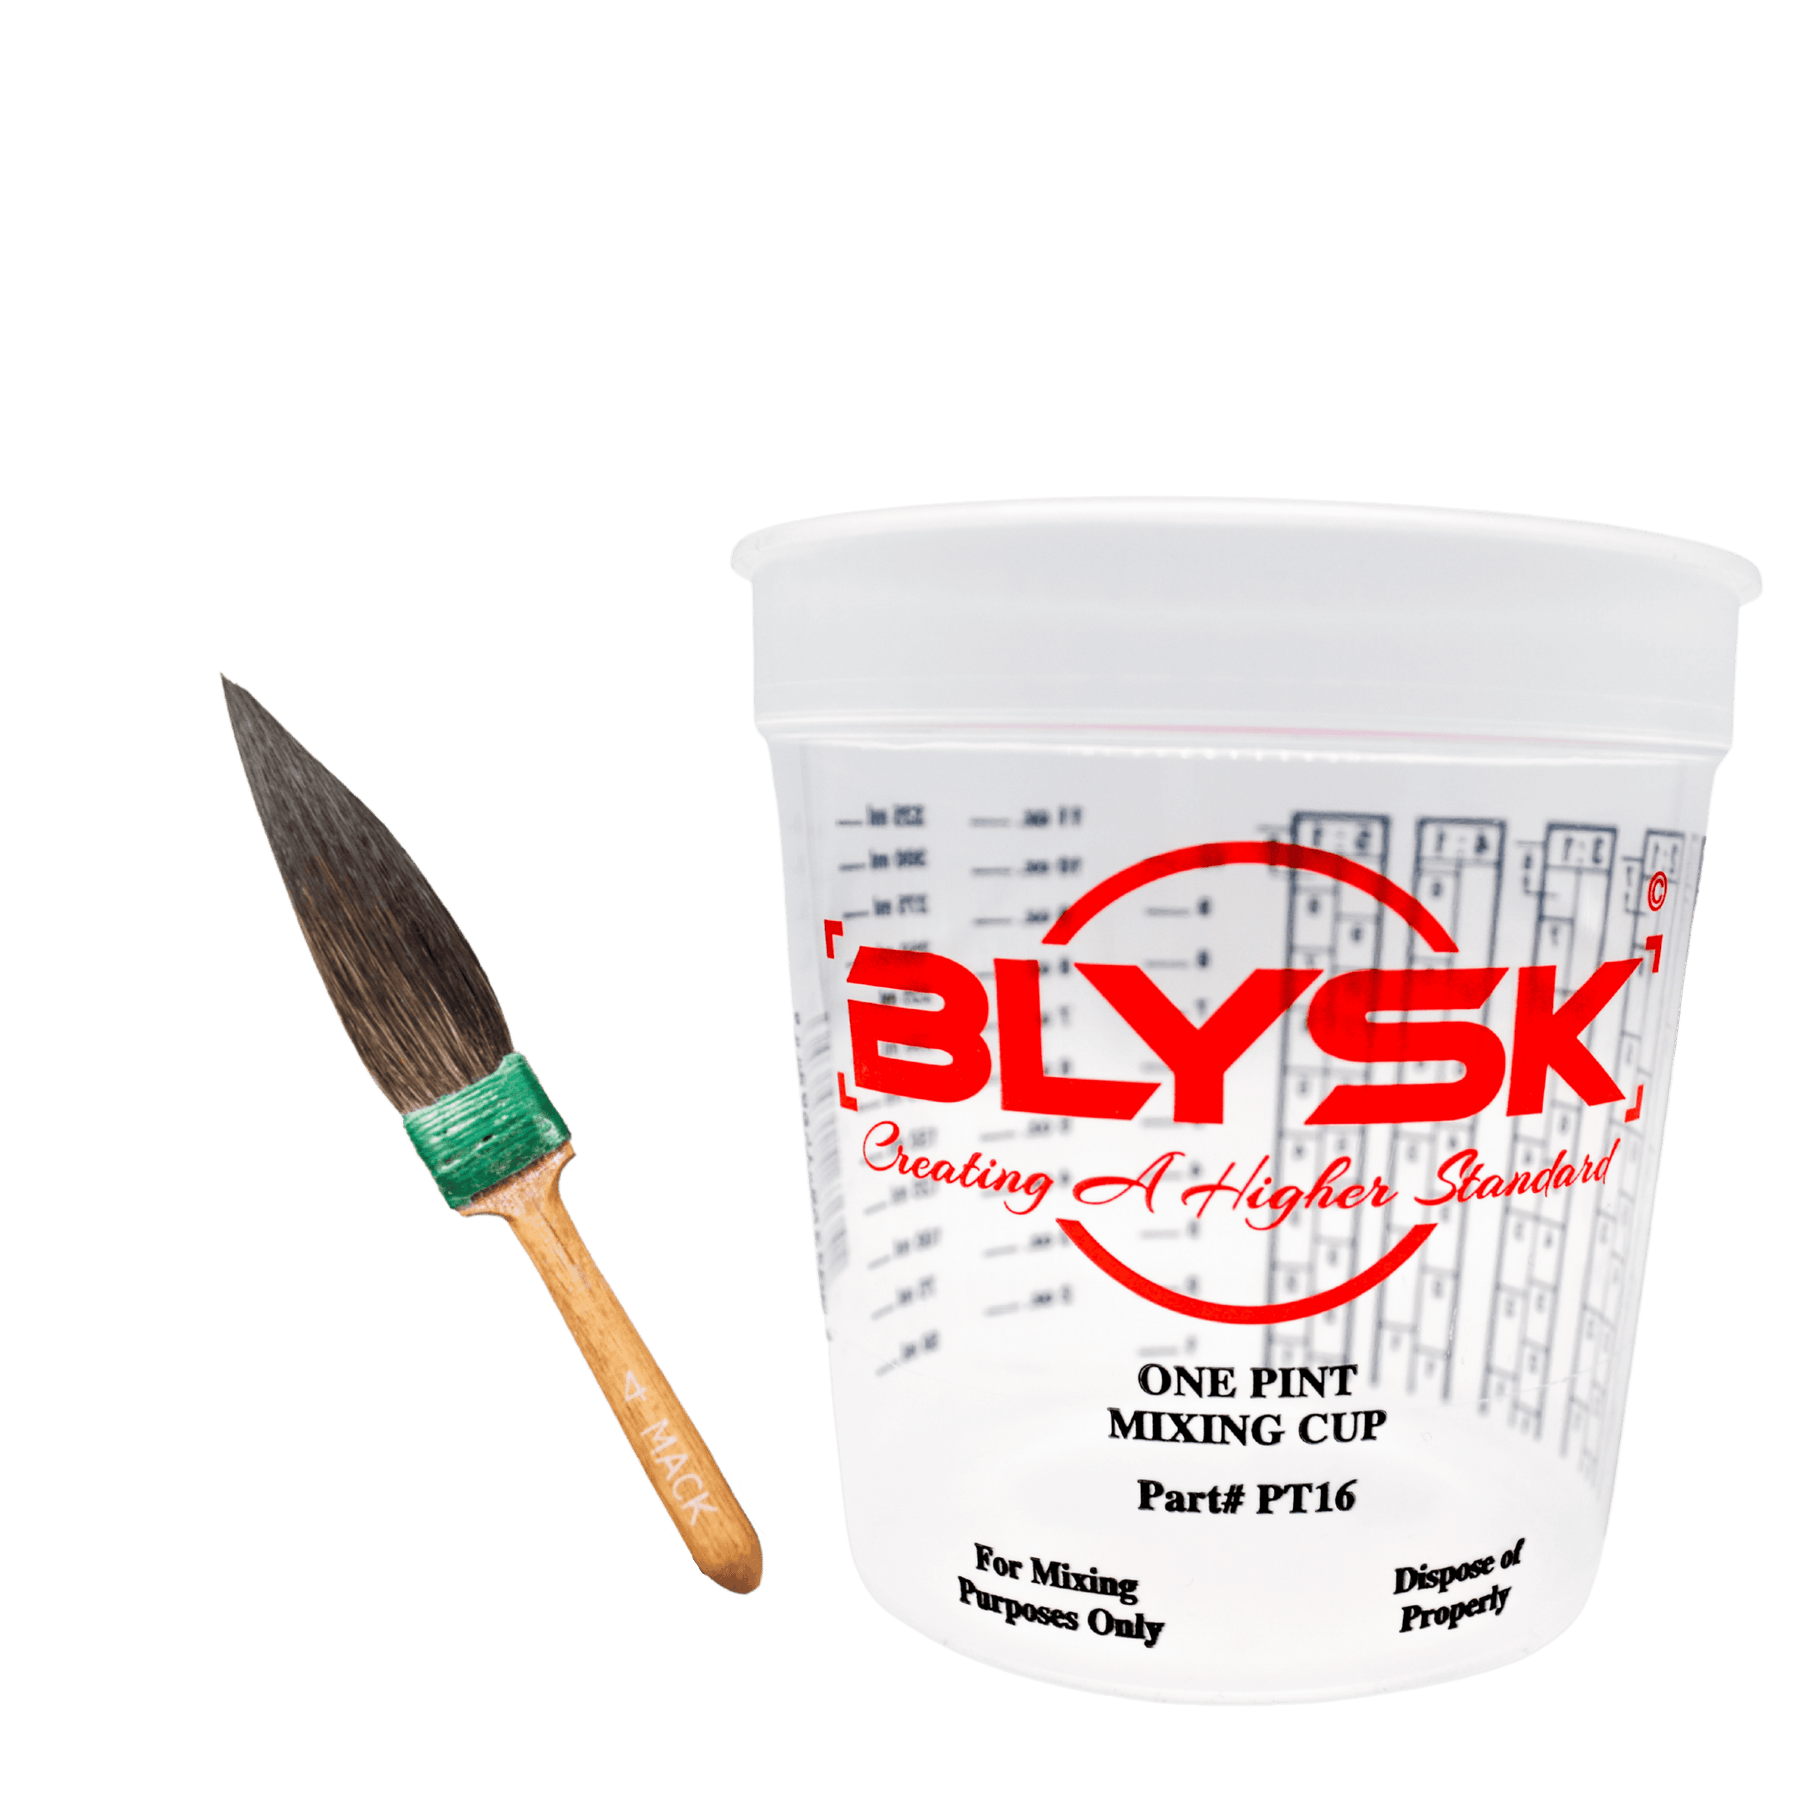 BLYSK and Mack Sword Striping Brush Series 20 Bundle with Free Pint Measuring Paint Cup, pinstriping, Squirrel Hair, Sign, Lettering, Professional Art Supplies - Maazzo